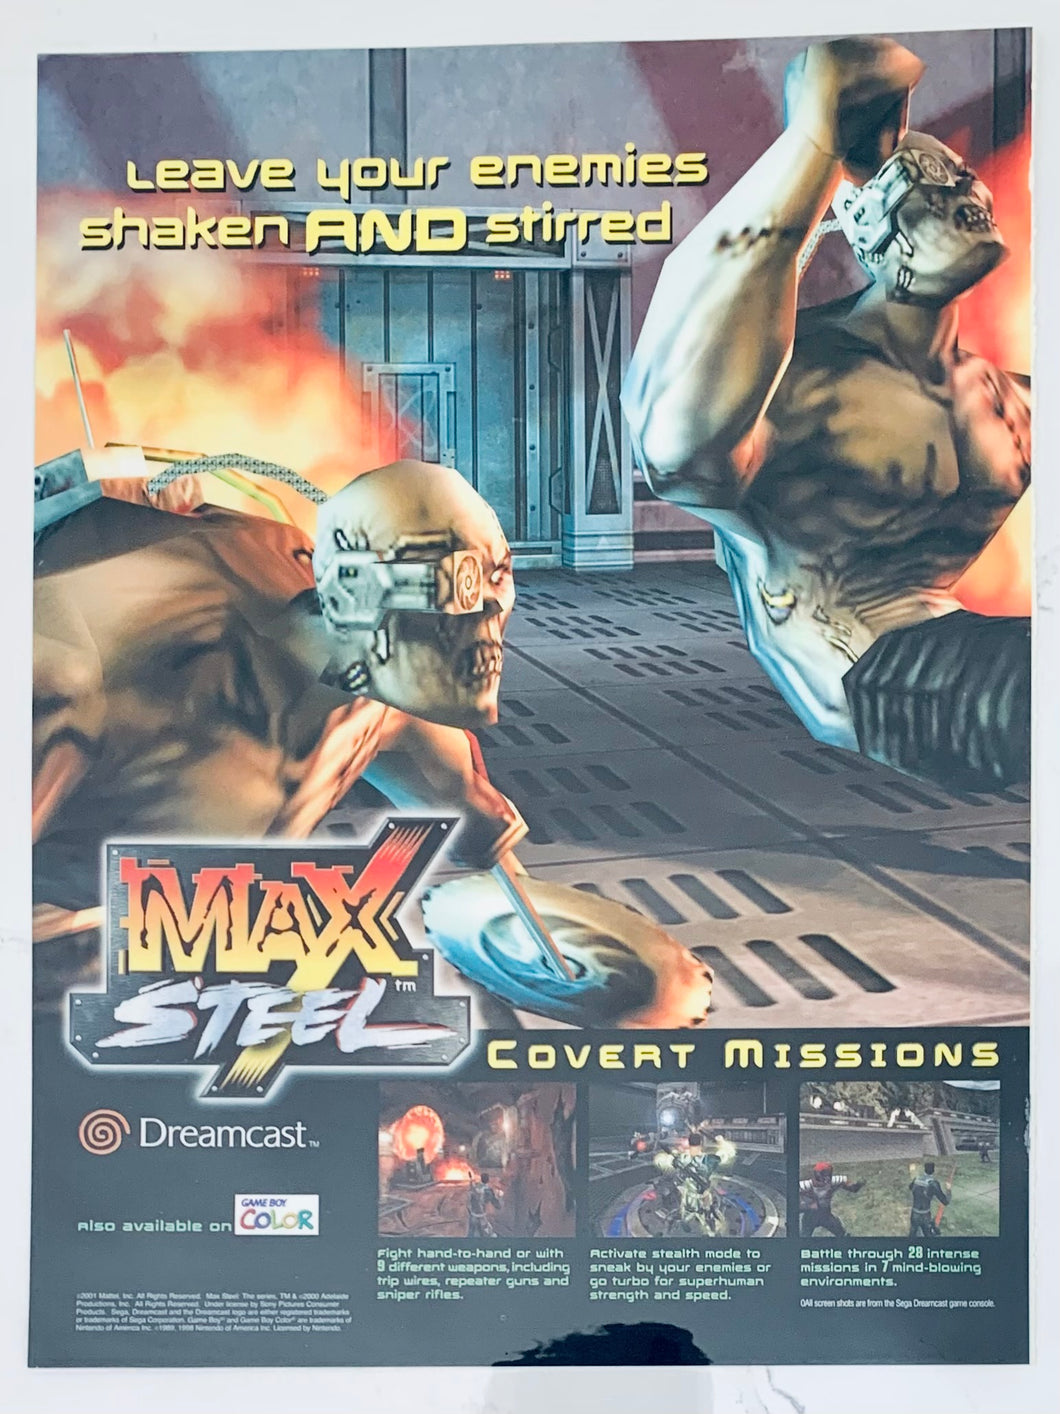 Max Steel: Covert Missions - Dreamcast - Original Vintage Advertisement - Print Ads - Laminated A4 Poster